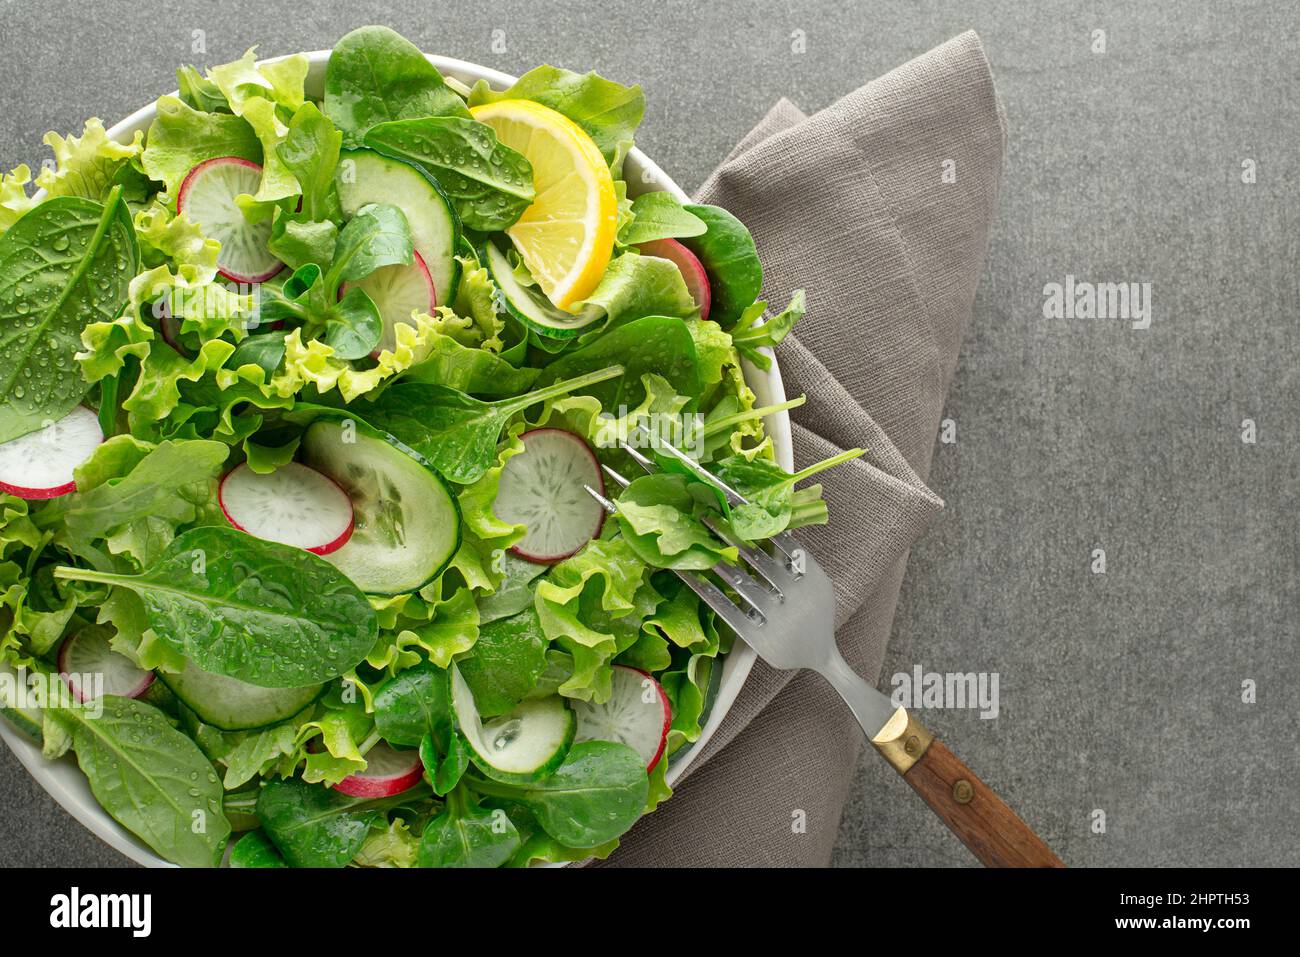 Healthy Green salad with fresh vegetables on grey table background Stock Photo